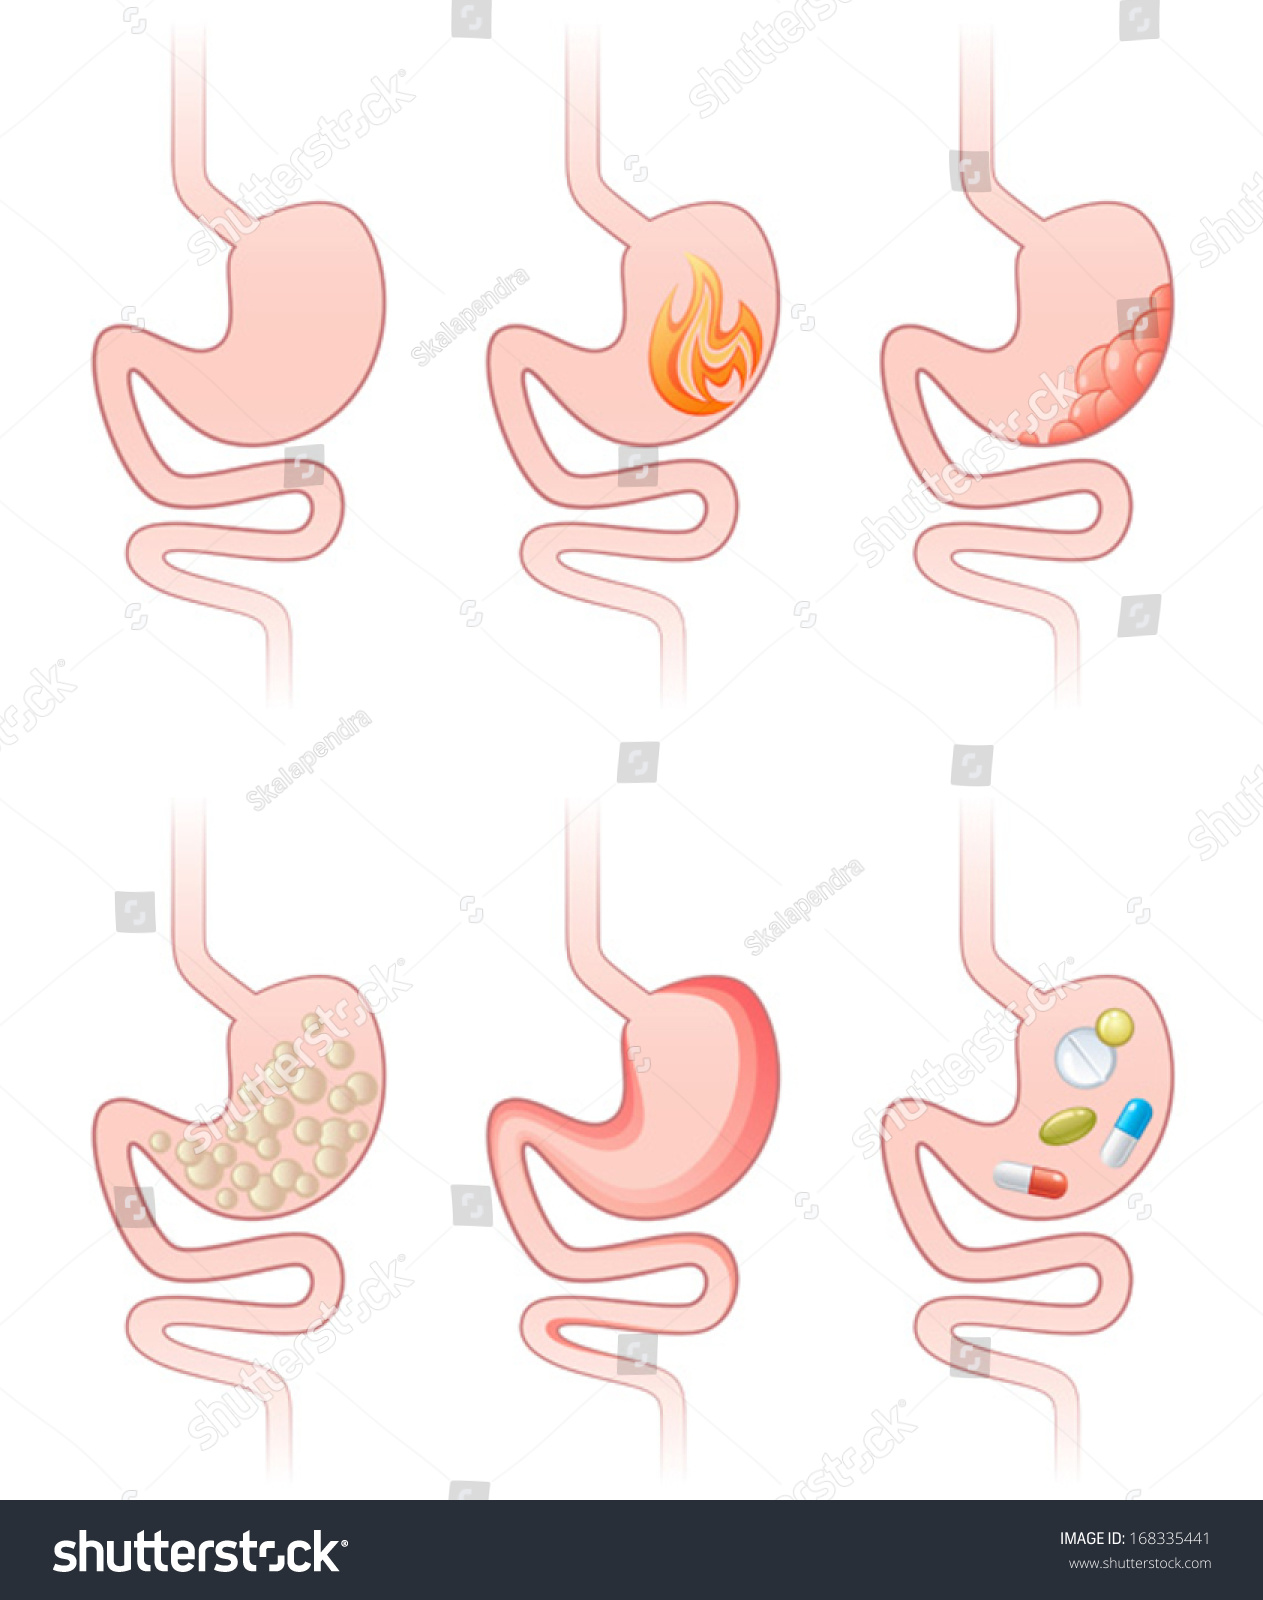 Stomach Sick Stock Vector (Royalty Free) 168335441